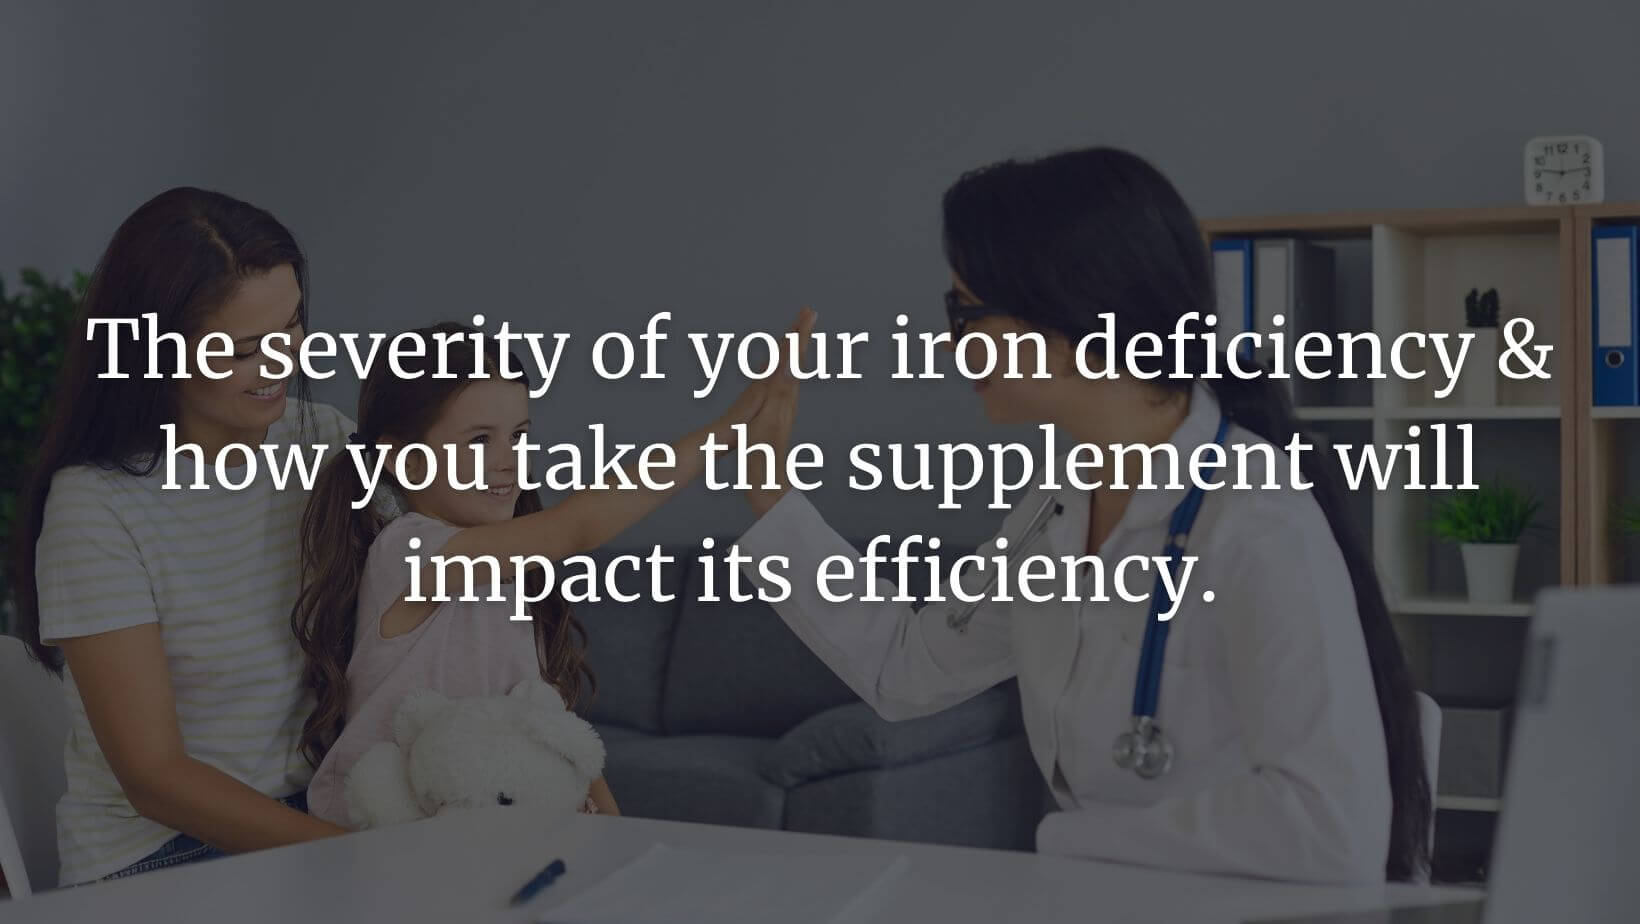 The severity of your iron deficiency & how you take the supplement will impact its efficiency.